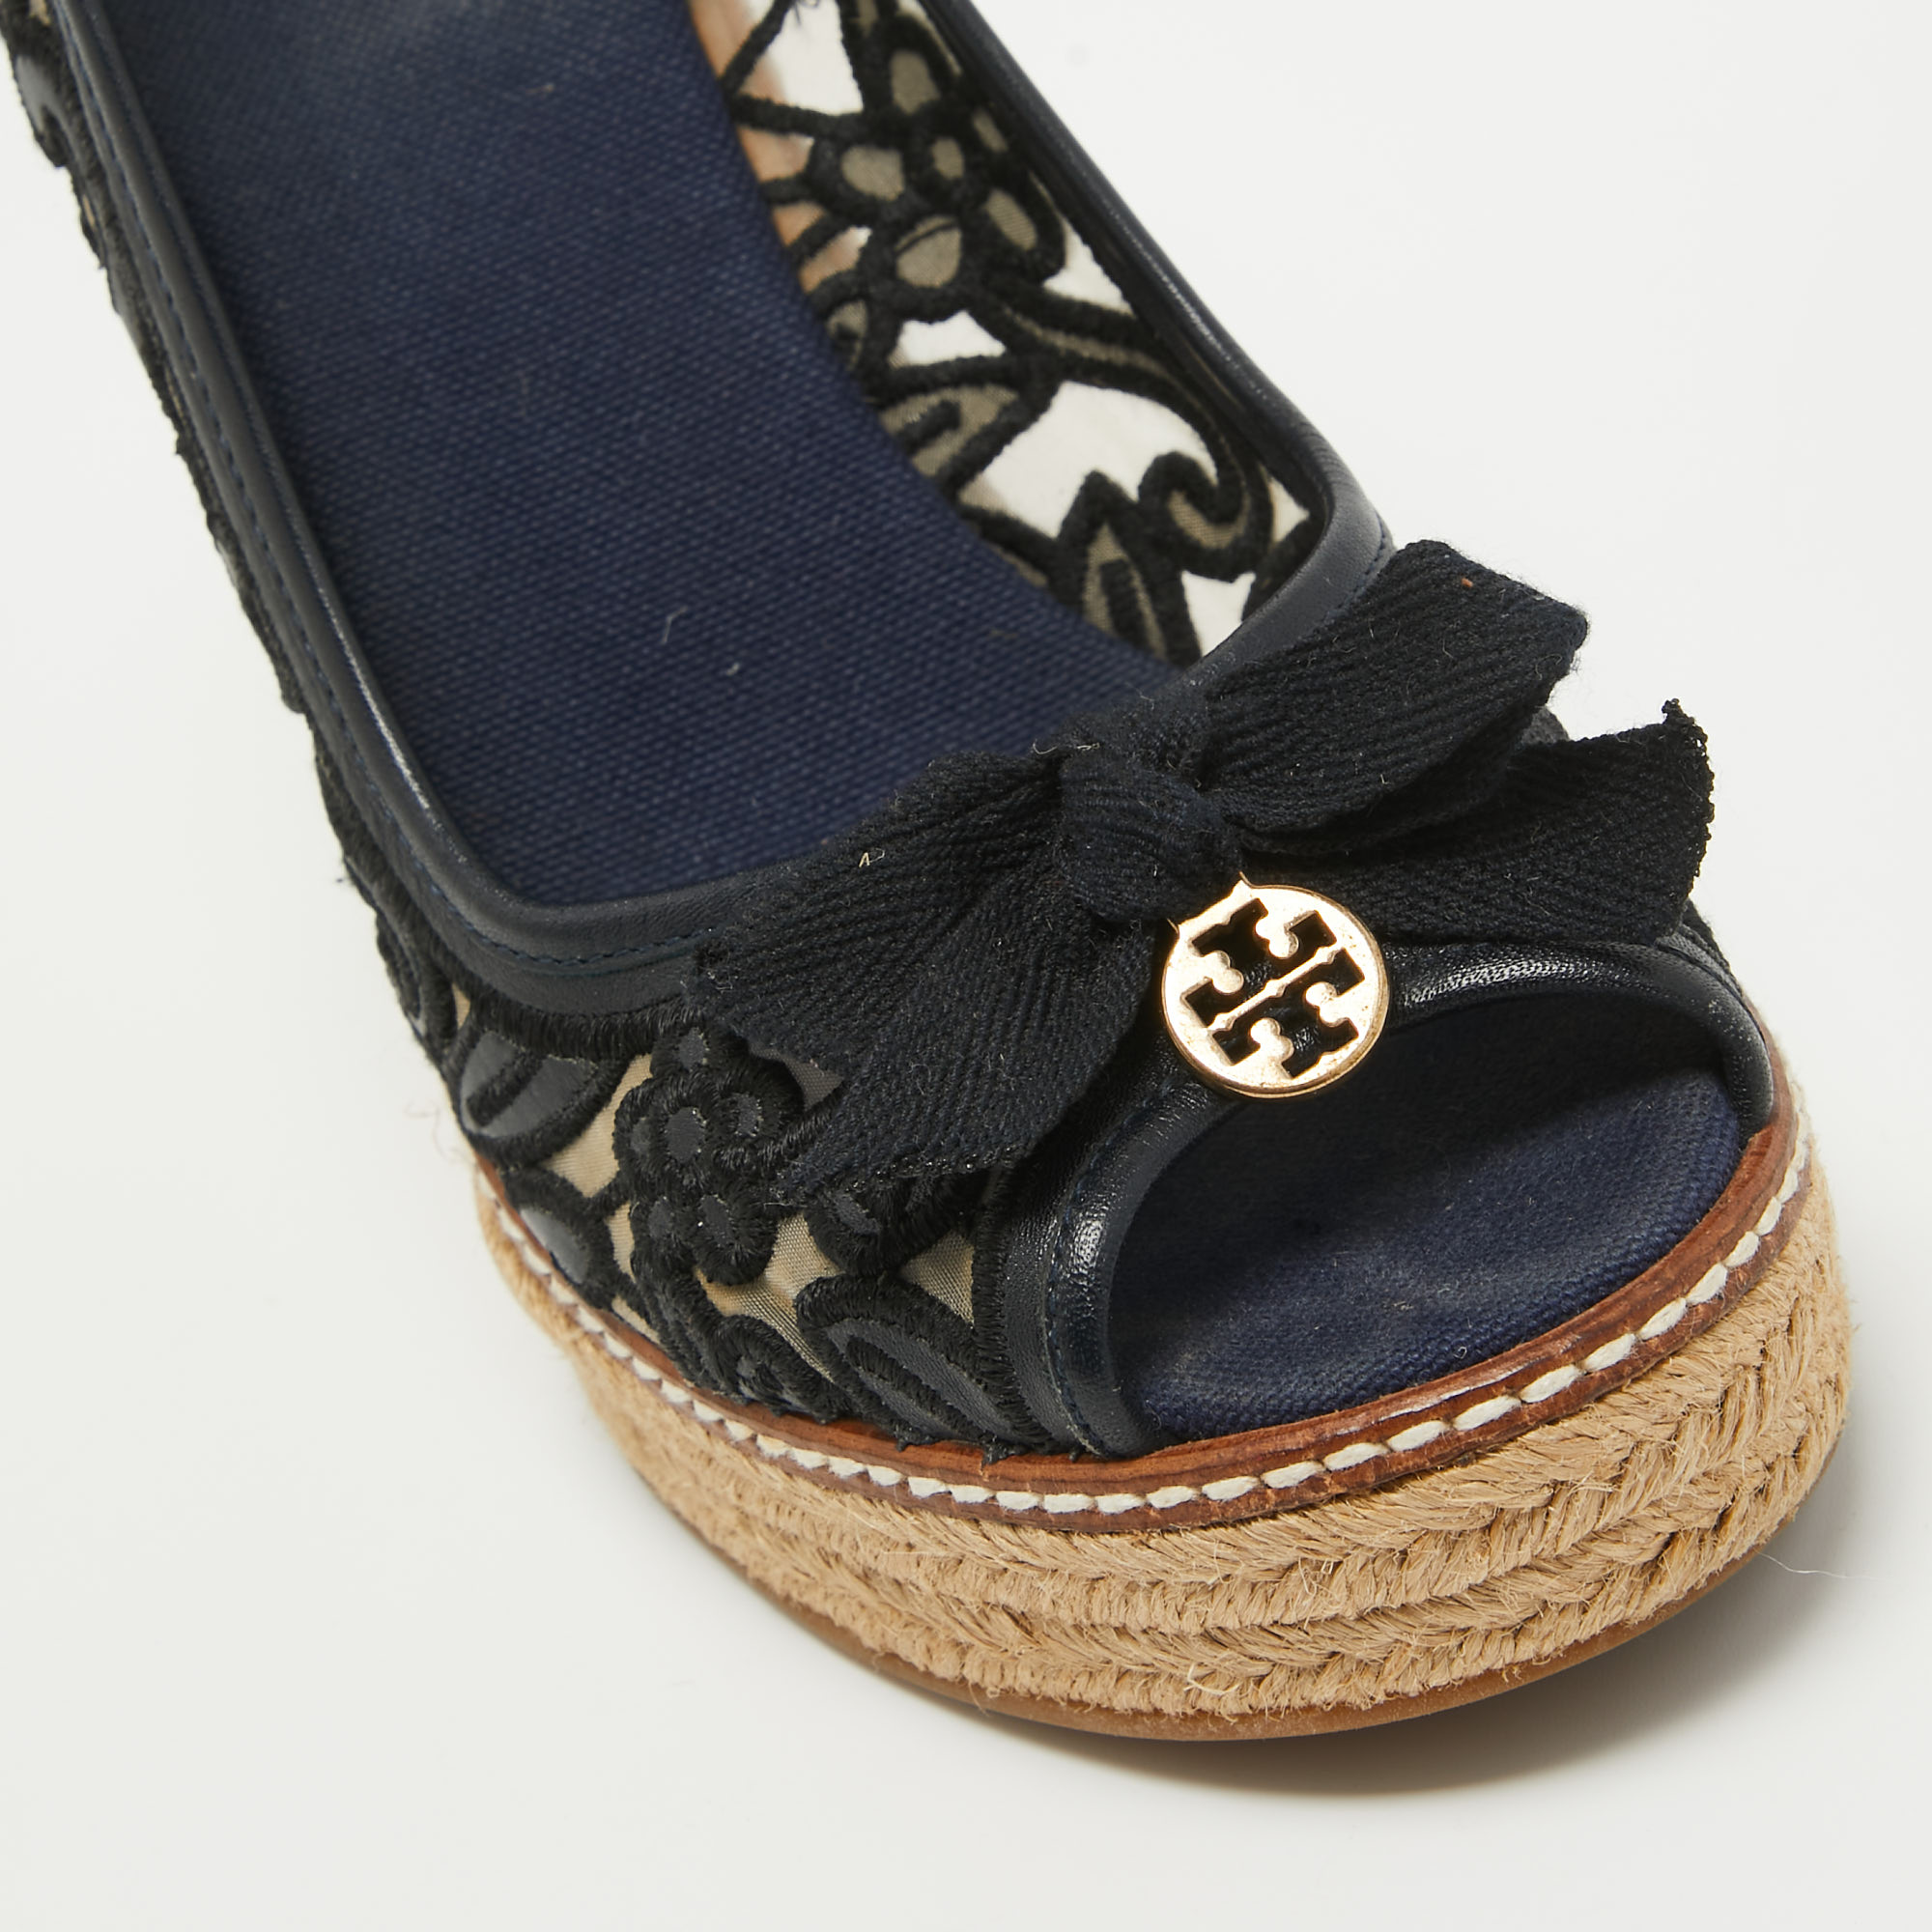 Tory Burch Black Leather Wedge Espadrille Pumps Size 36.5